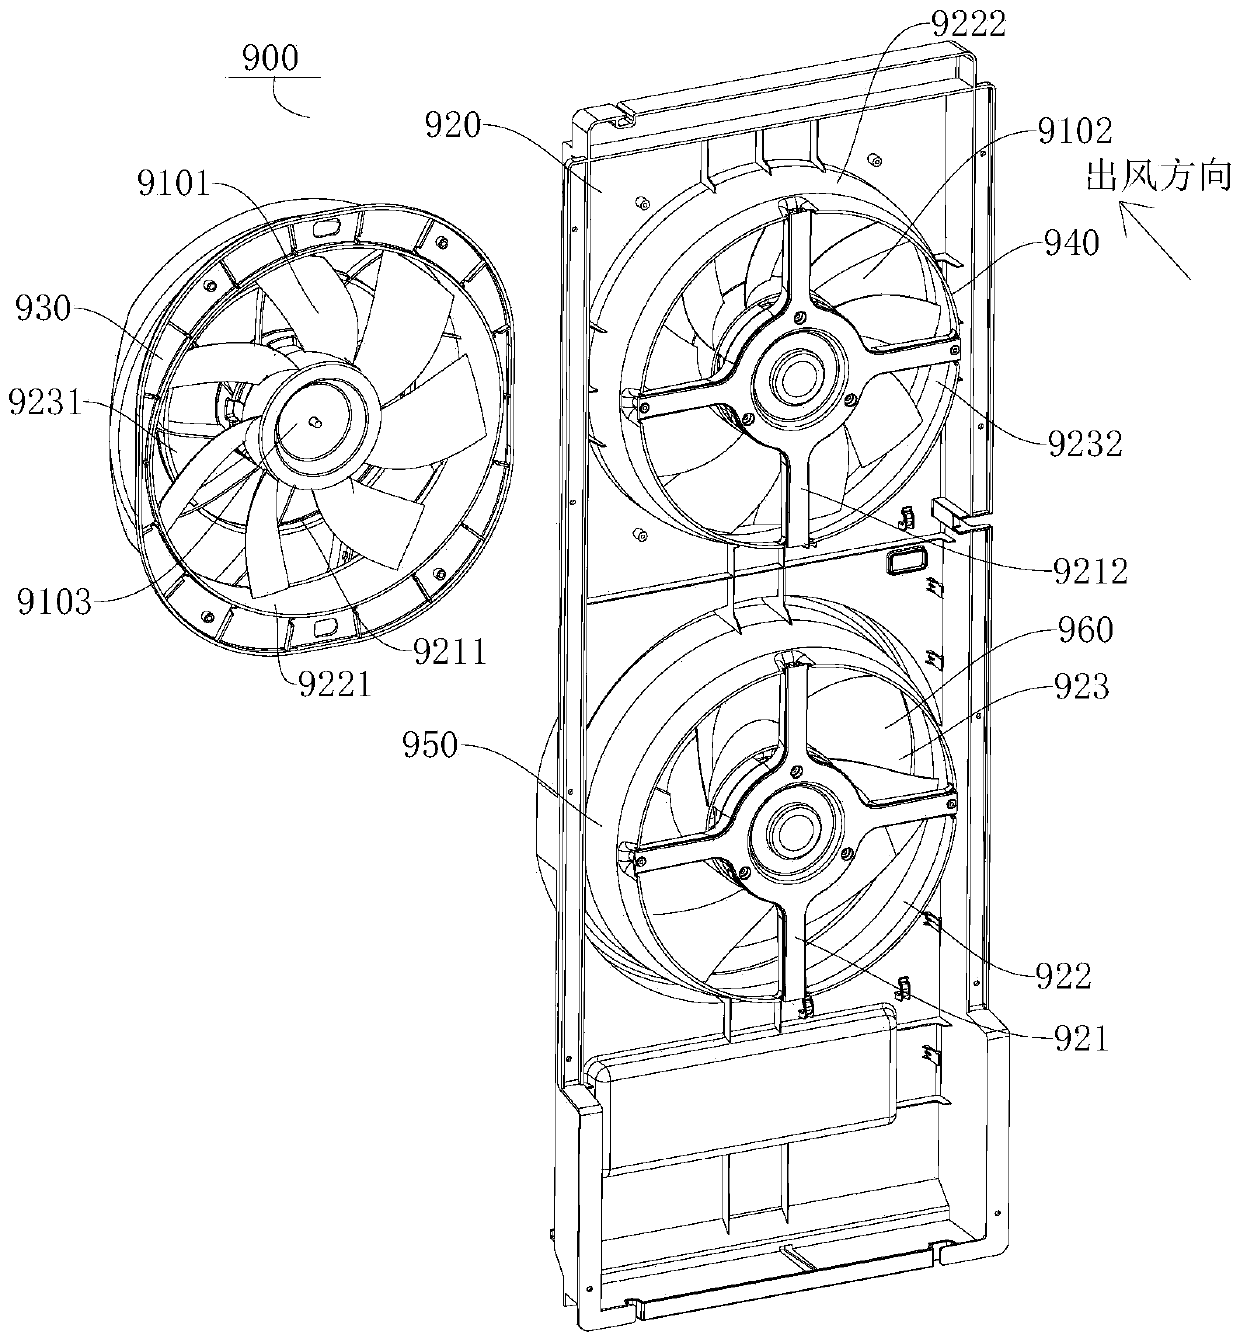 Fan blades, fan assembly, air duct part and air conditioner